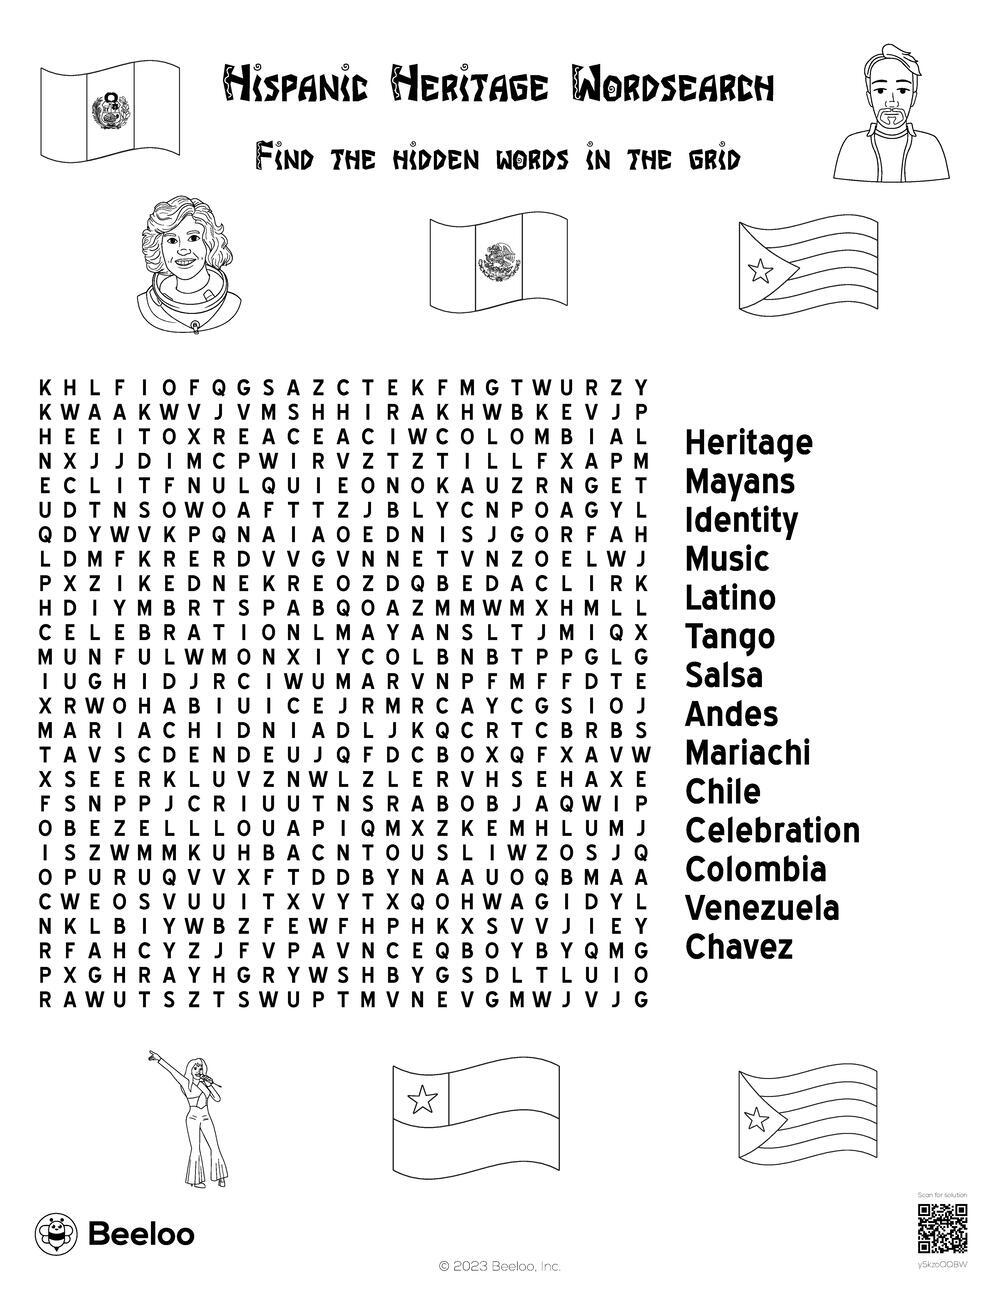 Hispanic Heritage Wordsearch Beeloo Printable Crafts And Activities For Kids